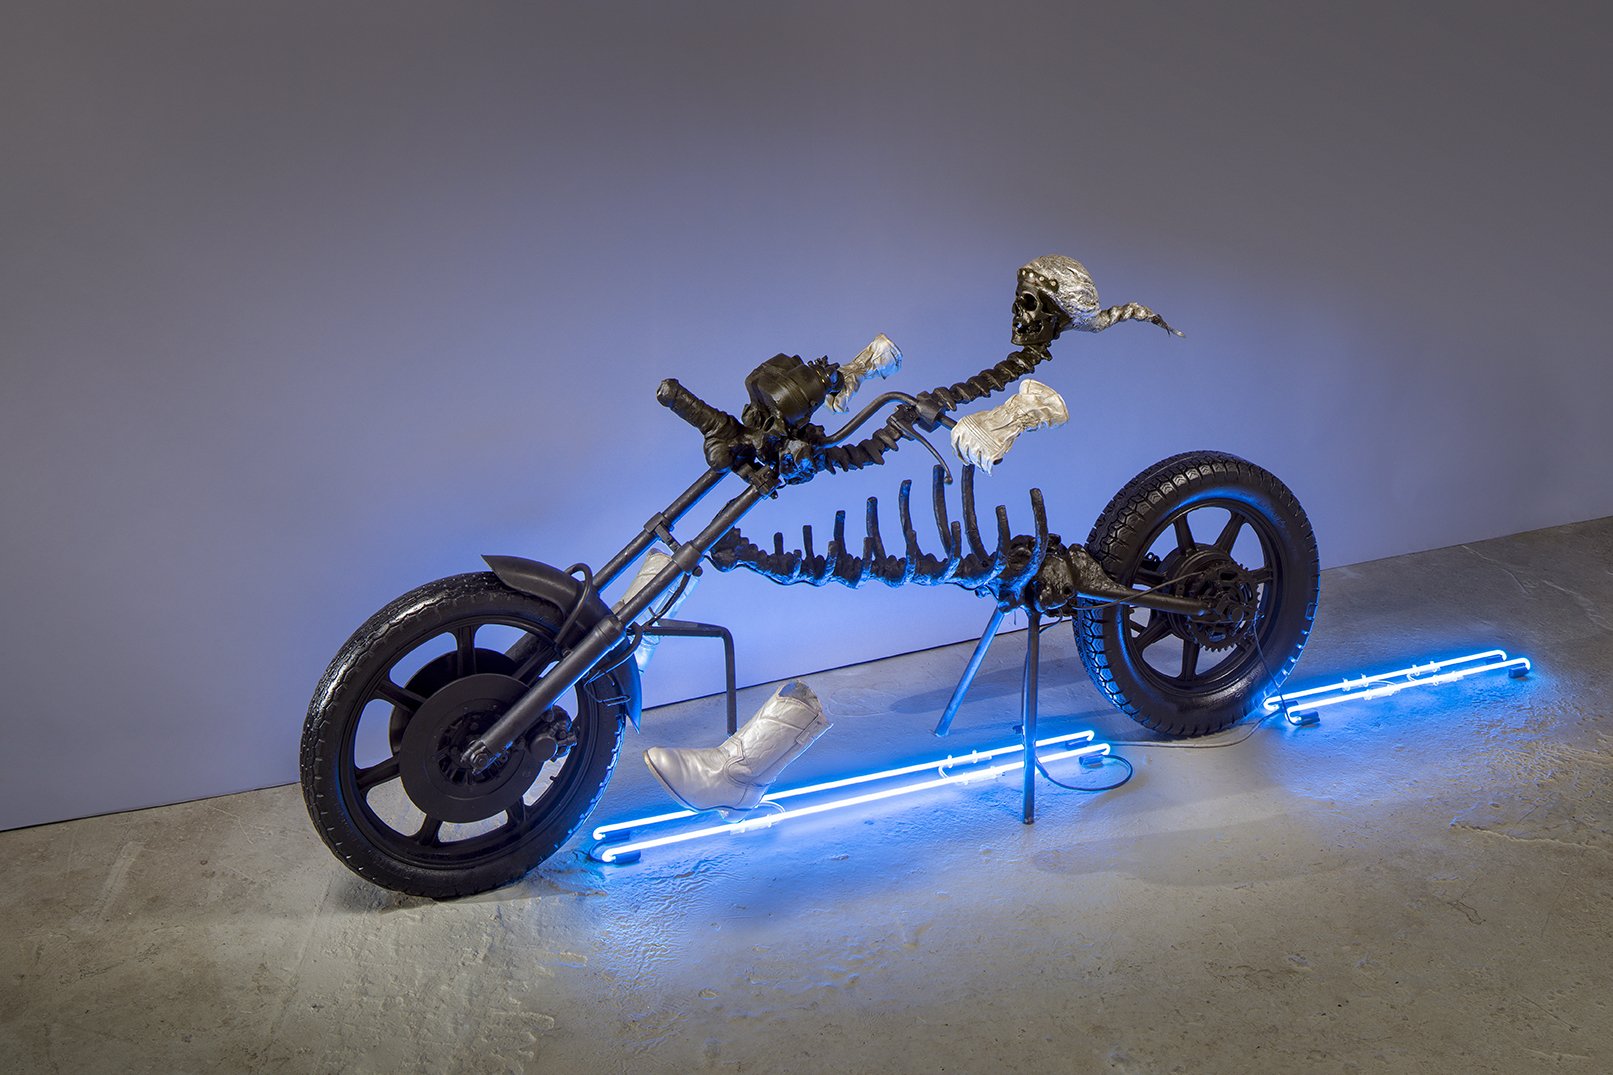  Marsha Pels,  Dead Cowboy , 2007-2008. Cast epoxy resin, cast rubber, deconstructed motorcycle, steel, neon lights, argon- mercury text on wall. 48 x 120.5 x 36 inches. 